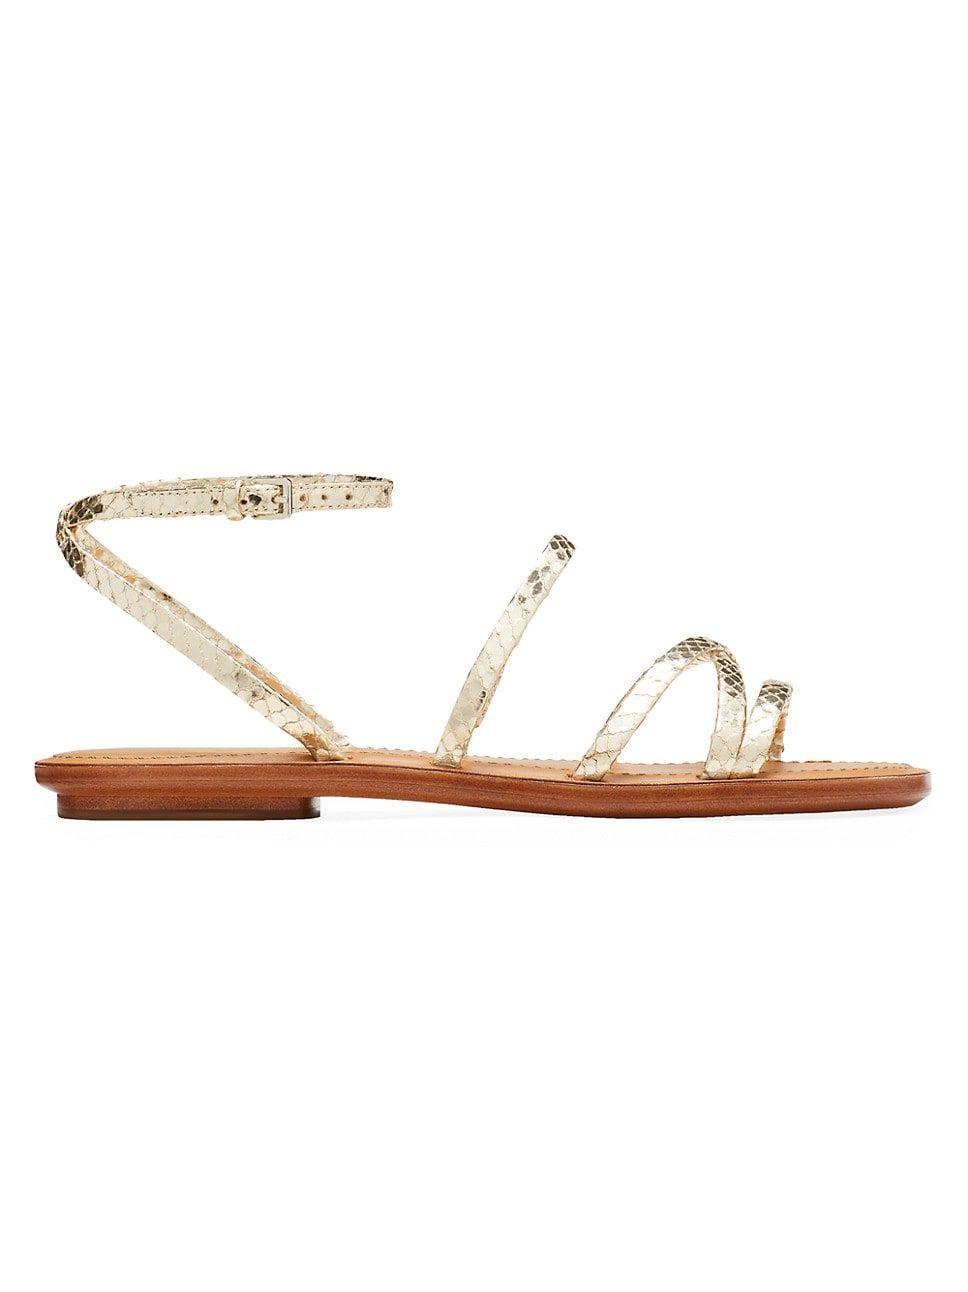 Cove Metallic Leather Strappy Sandals | Saks Fifth Avenue